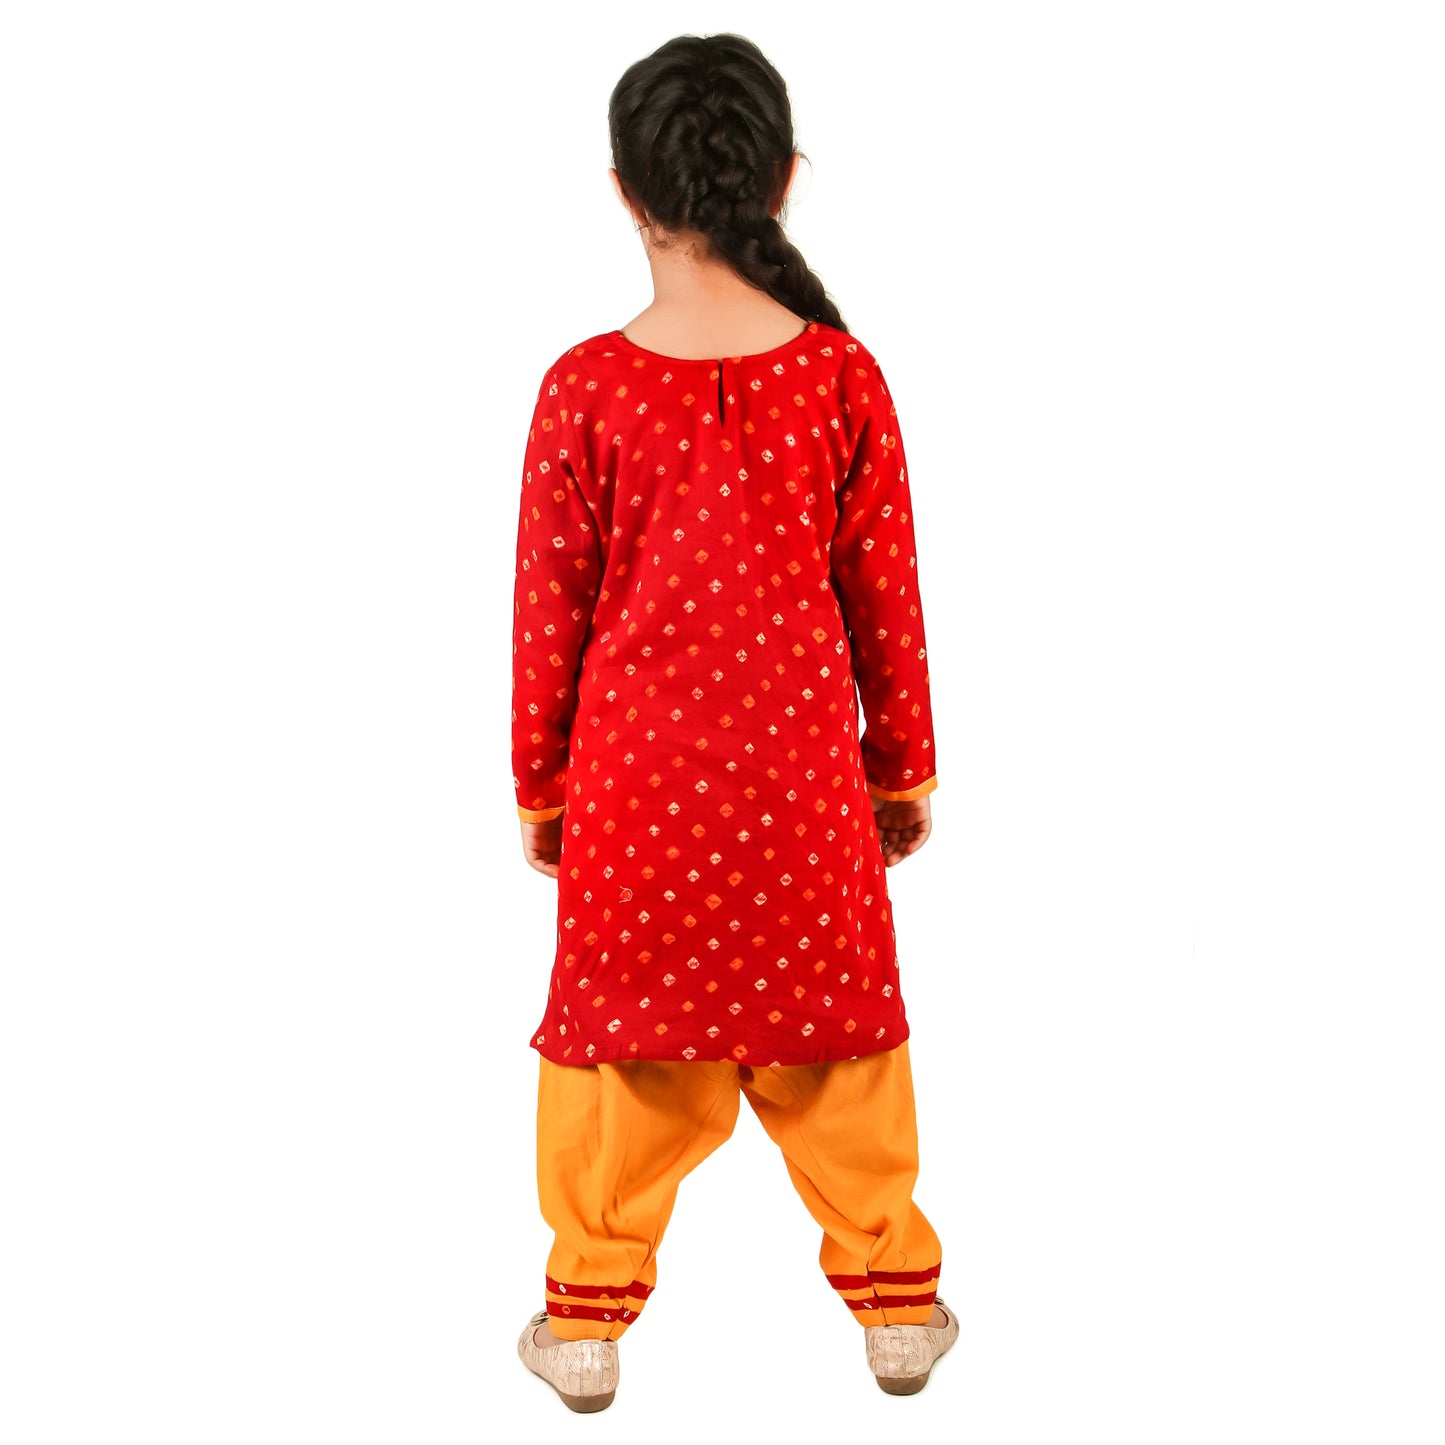 Red Bandhani Salwar Suit for Girls, Ages 6 Months to 16 Years, Cotton, Tie-Dye